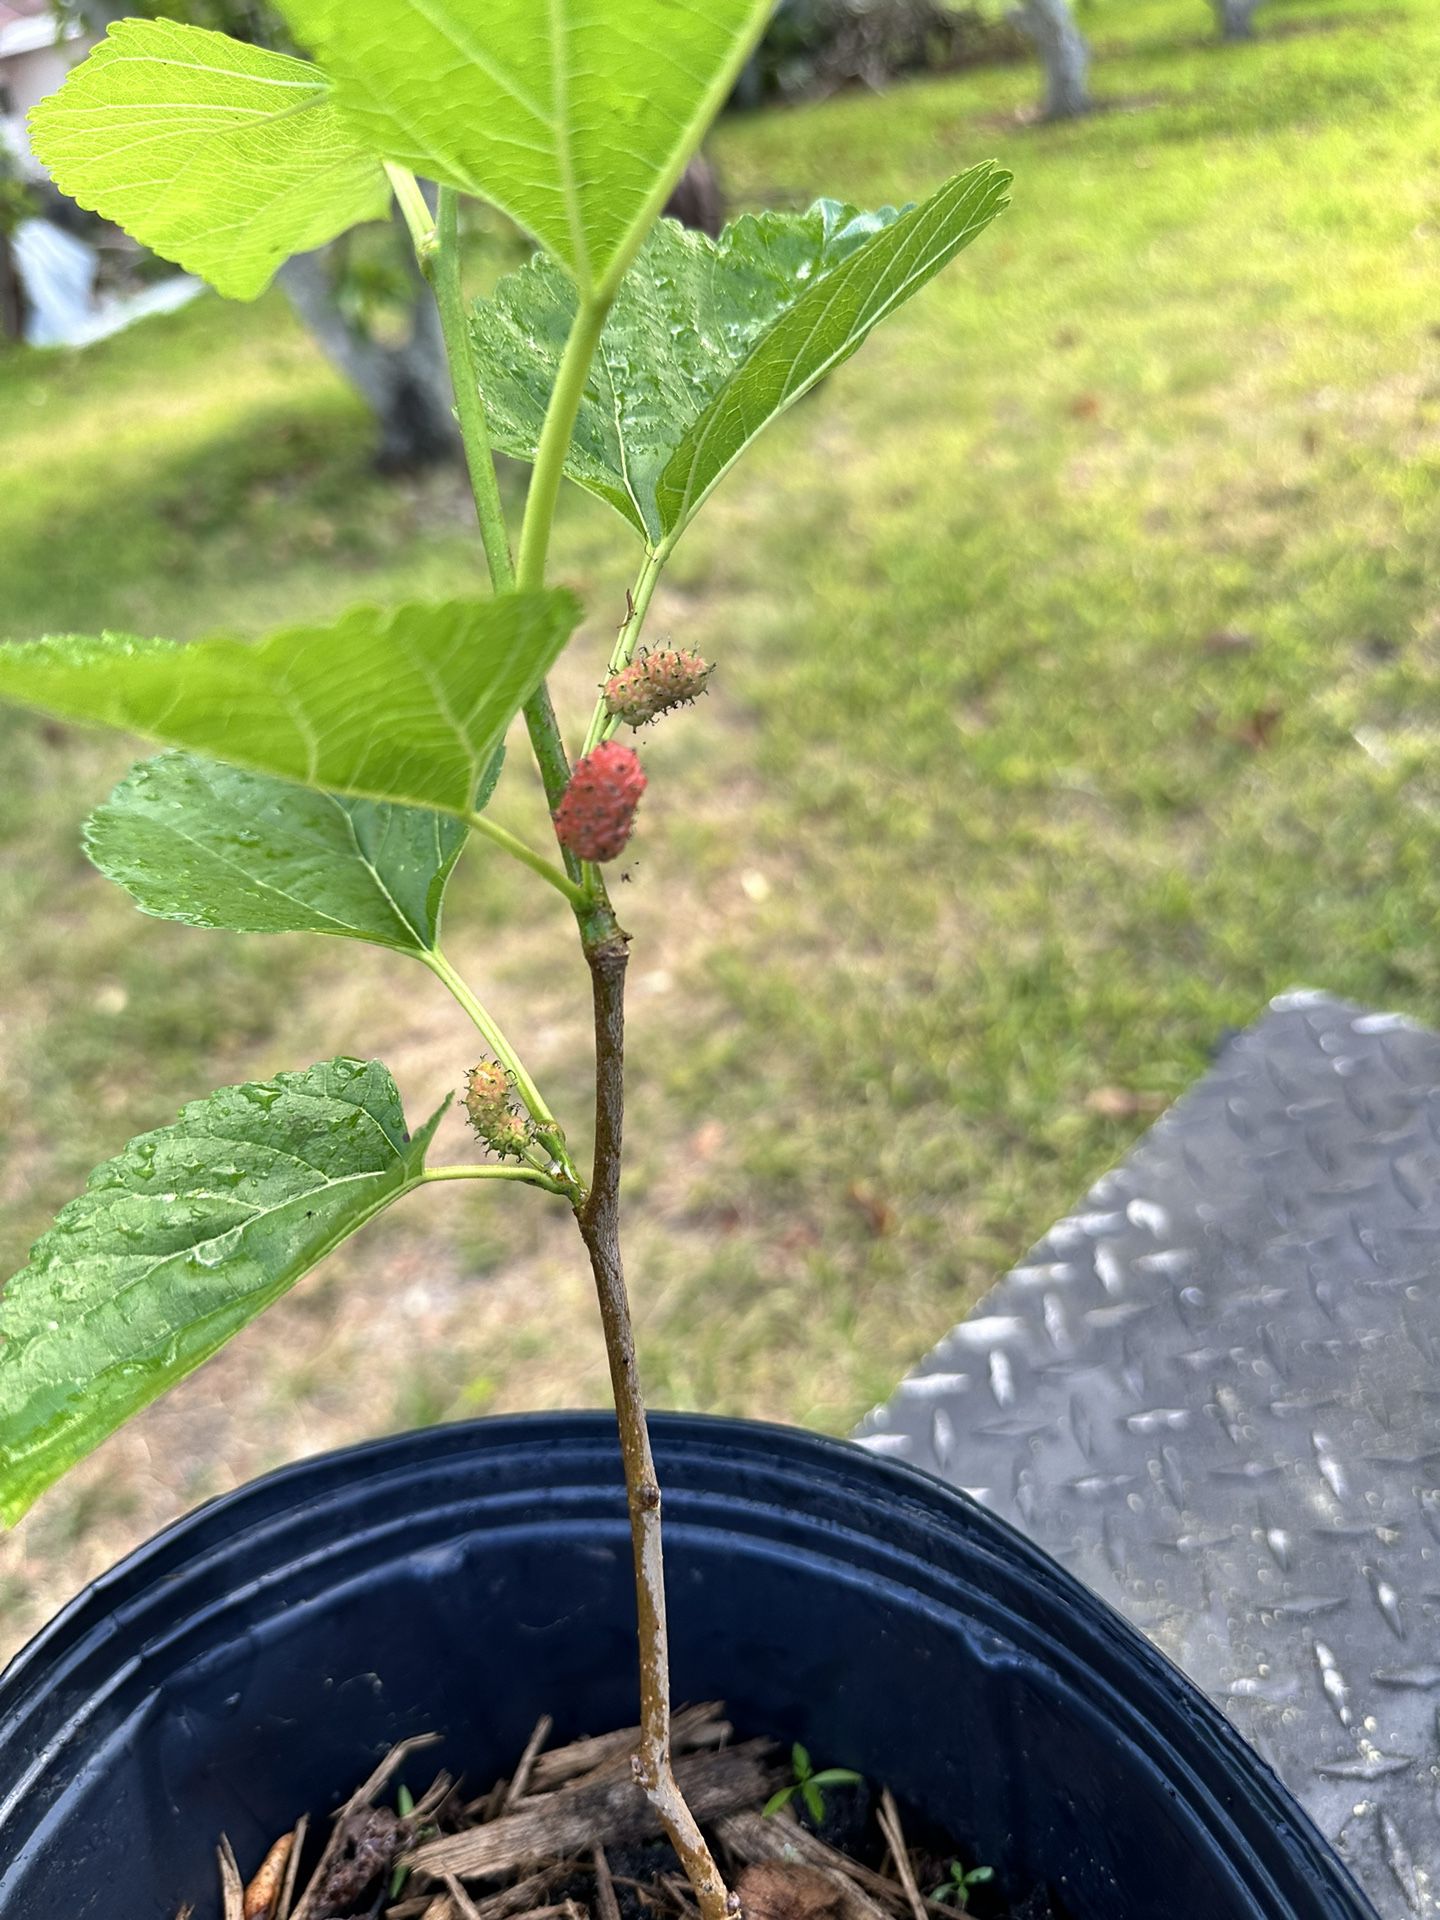 Mulberry Plant